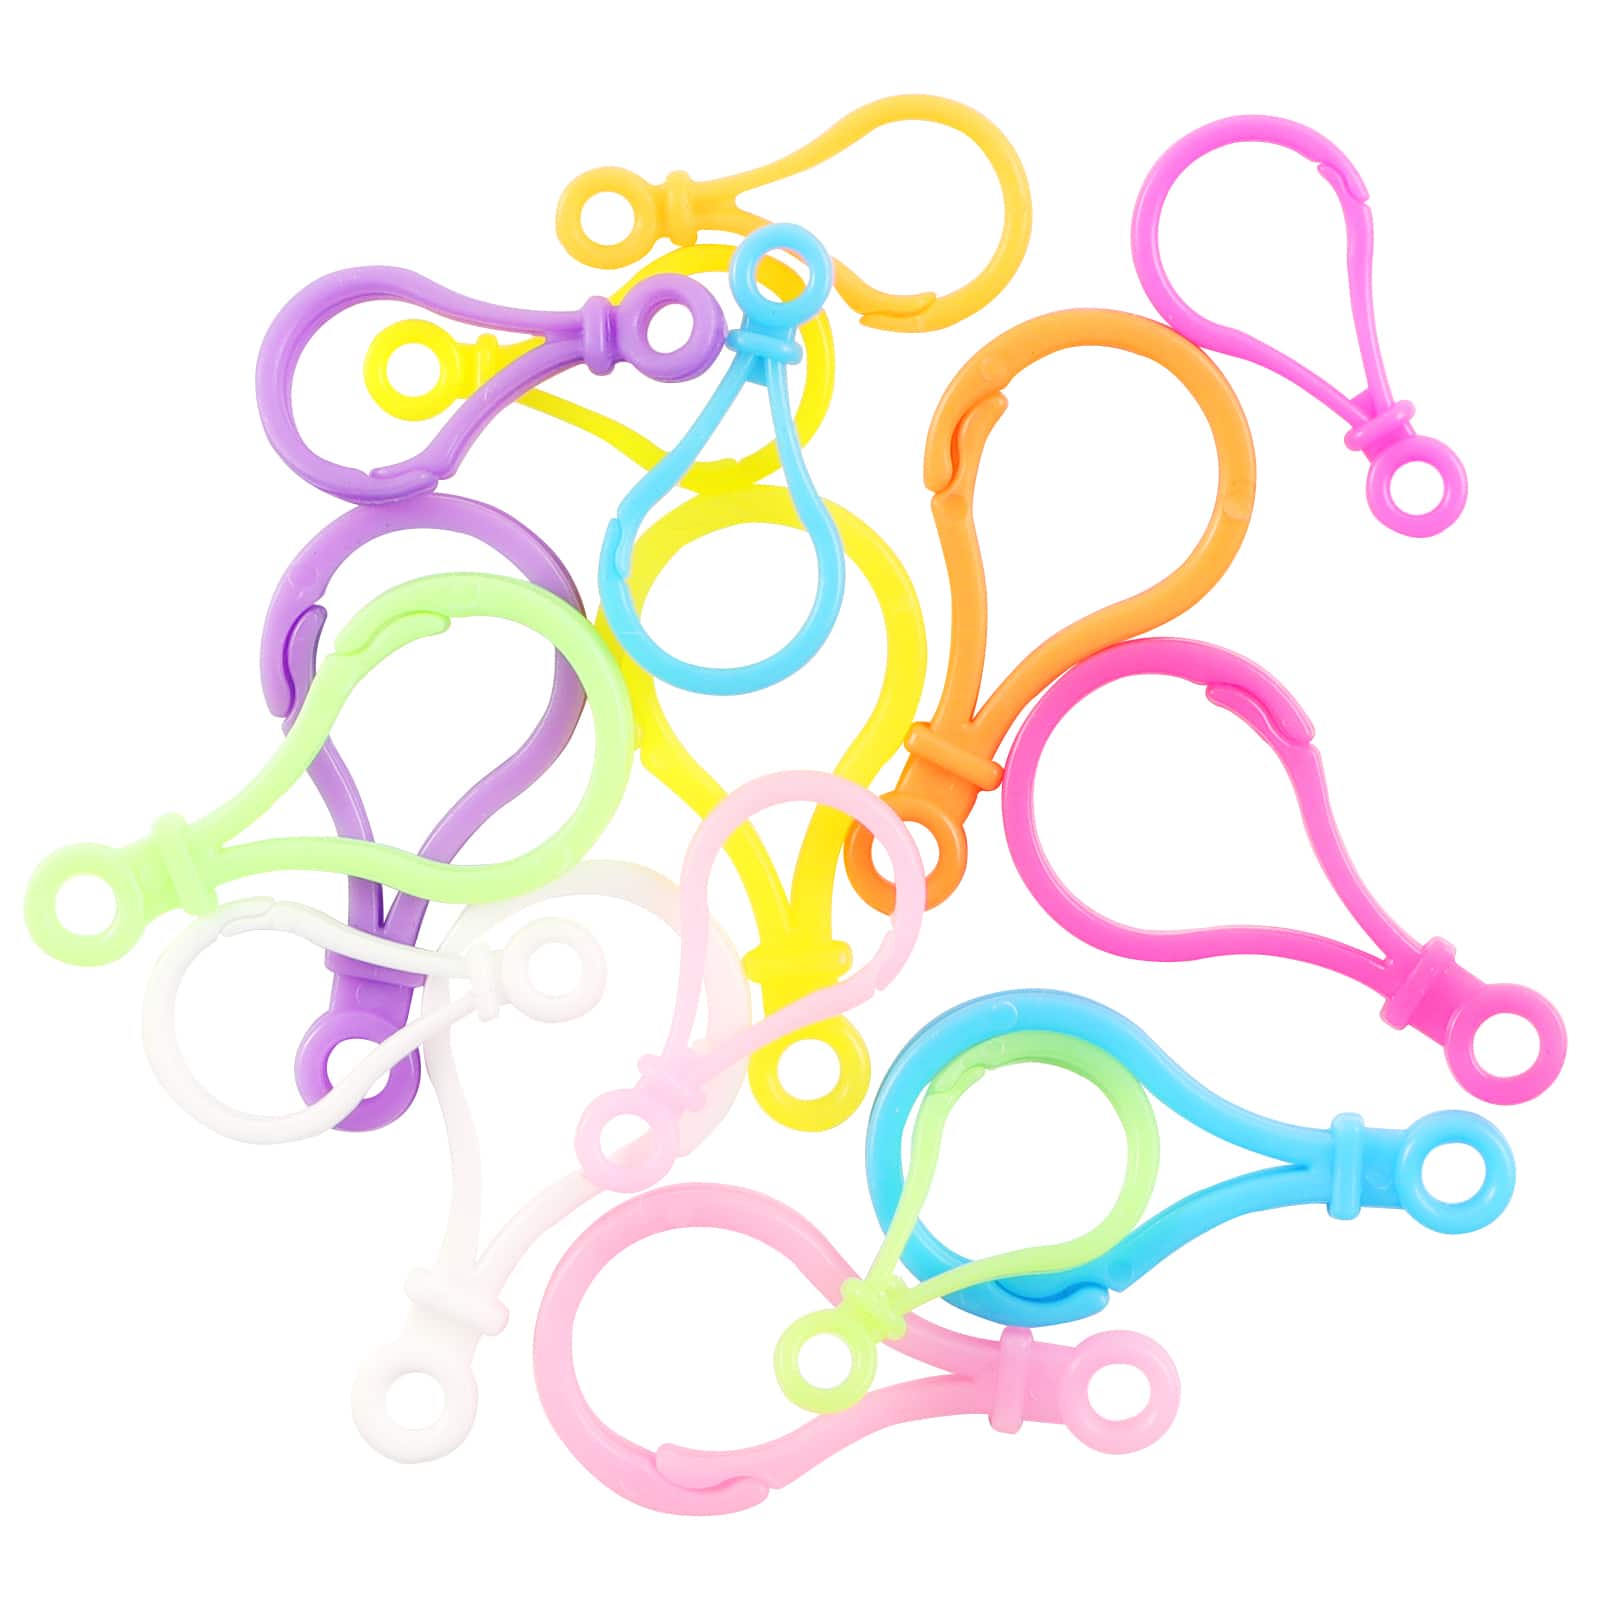 200 PCS of Multicolor Lobster Clasp Keychain Plastic Lanyard Clips, Plastic Lobster Claw Clasps Backpack Clips for Kids